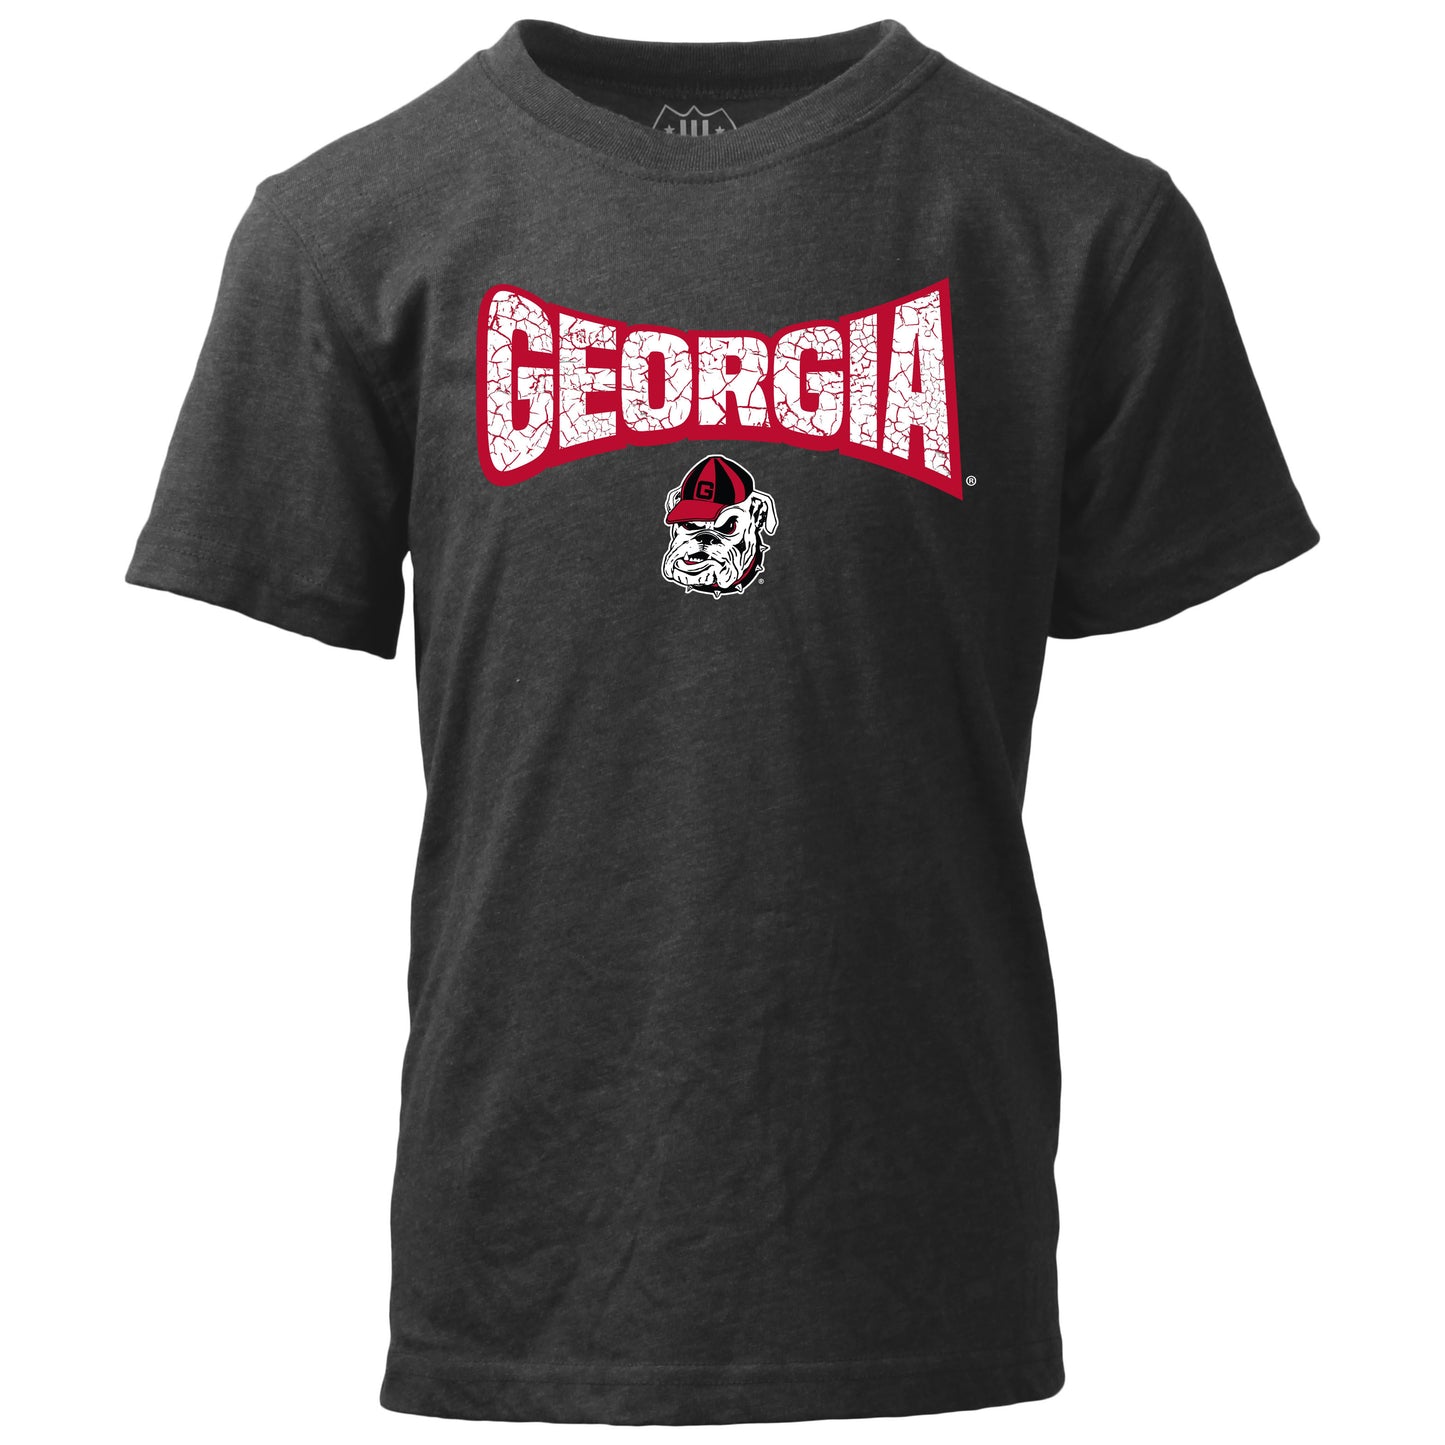 UGA Wes and Willy Toddler Black Tri-Blend Tee